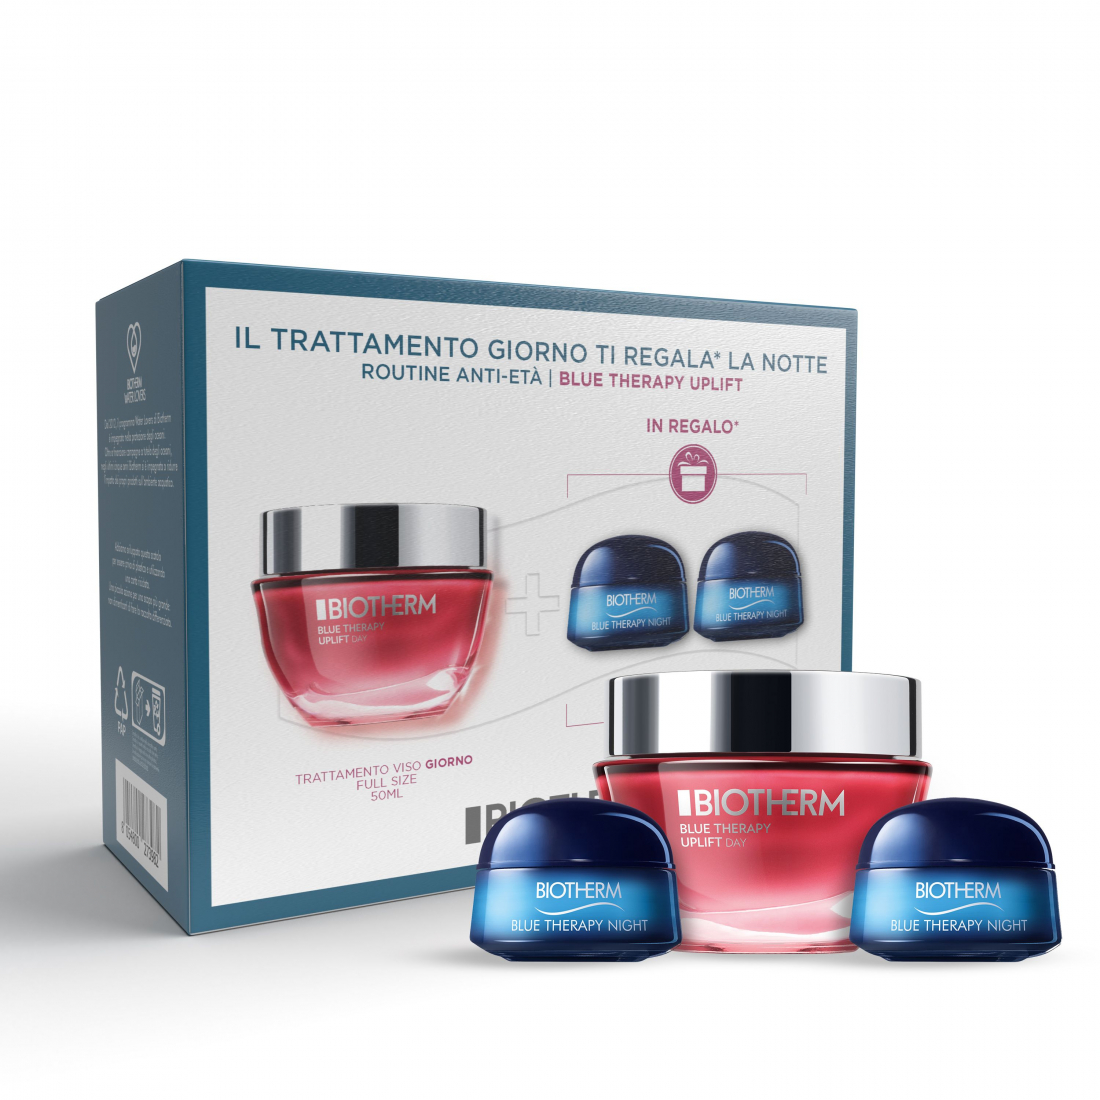 'Blue Therapy' Anti-aging treatment - 2 Pieces